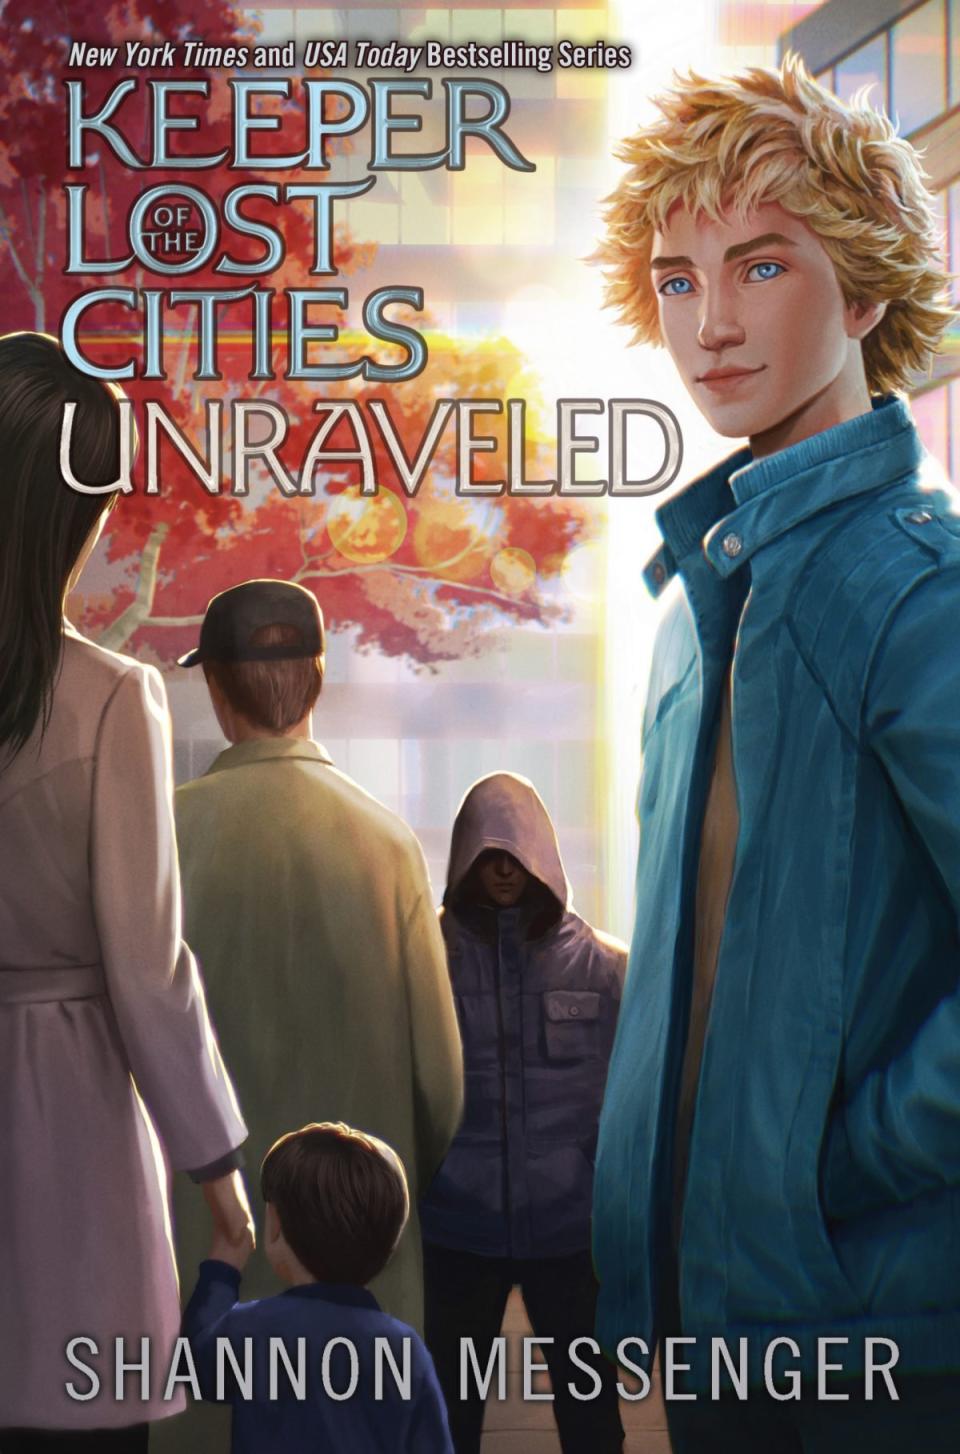 The cover of Keeper of the Lost Cities: Unraveled featuring Keefe with humans in the background